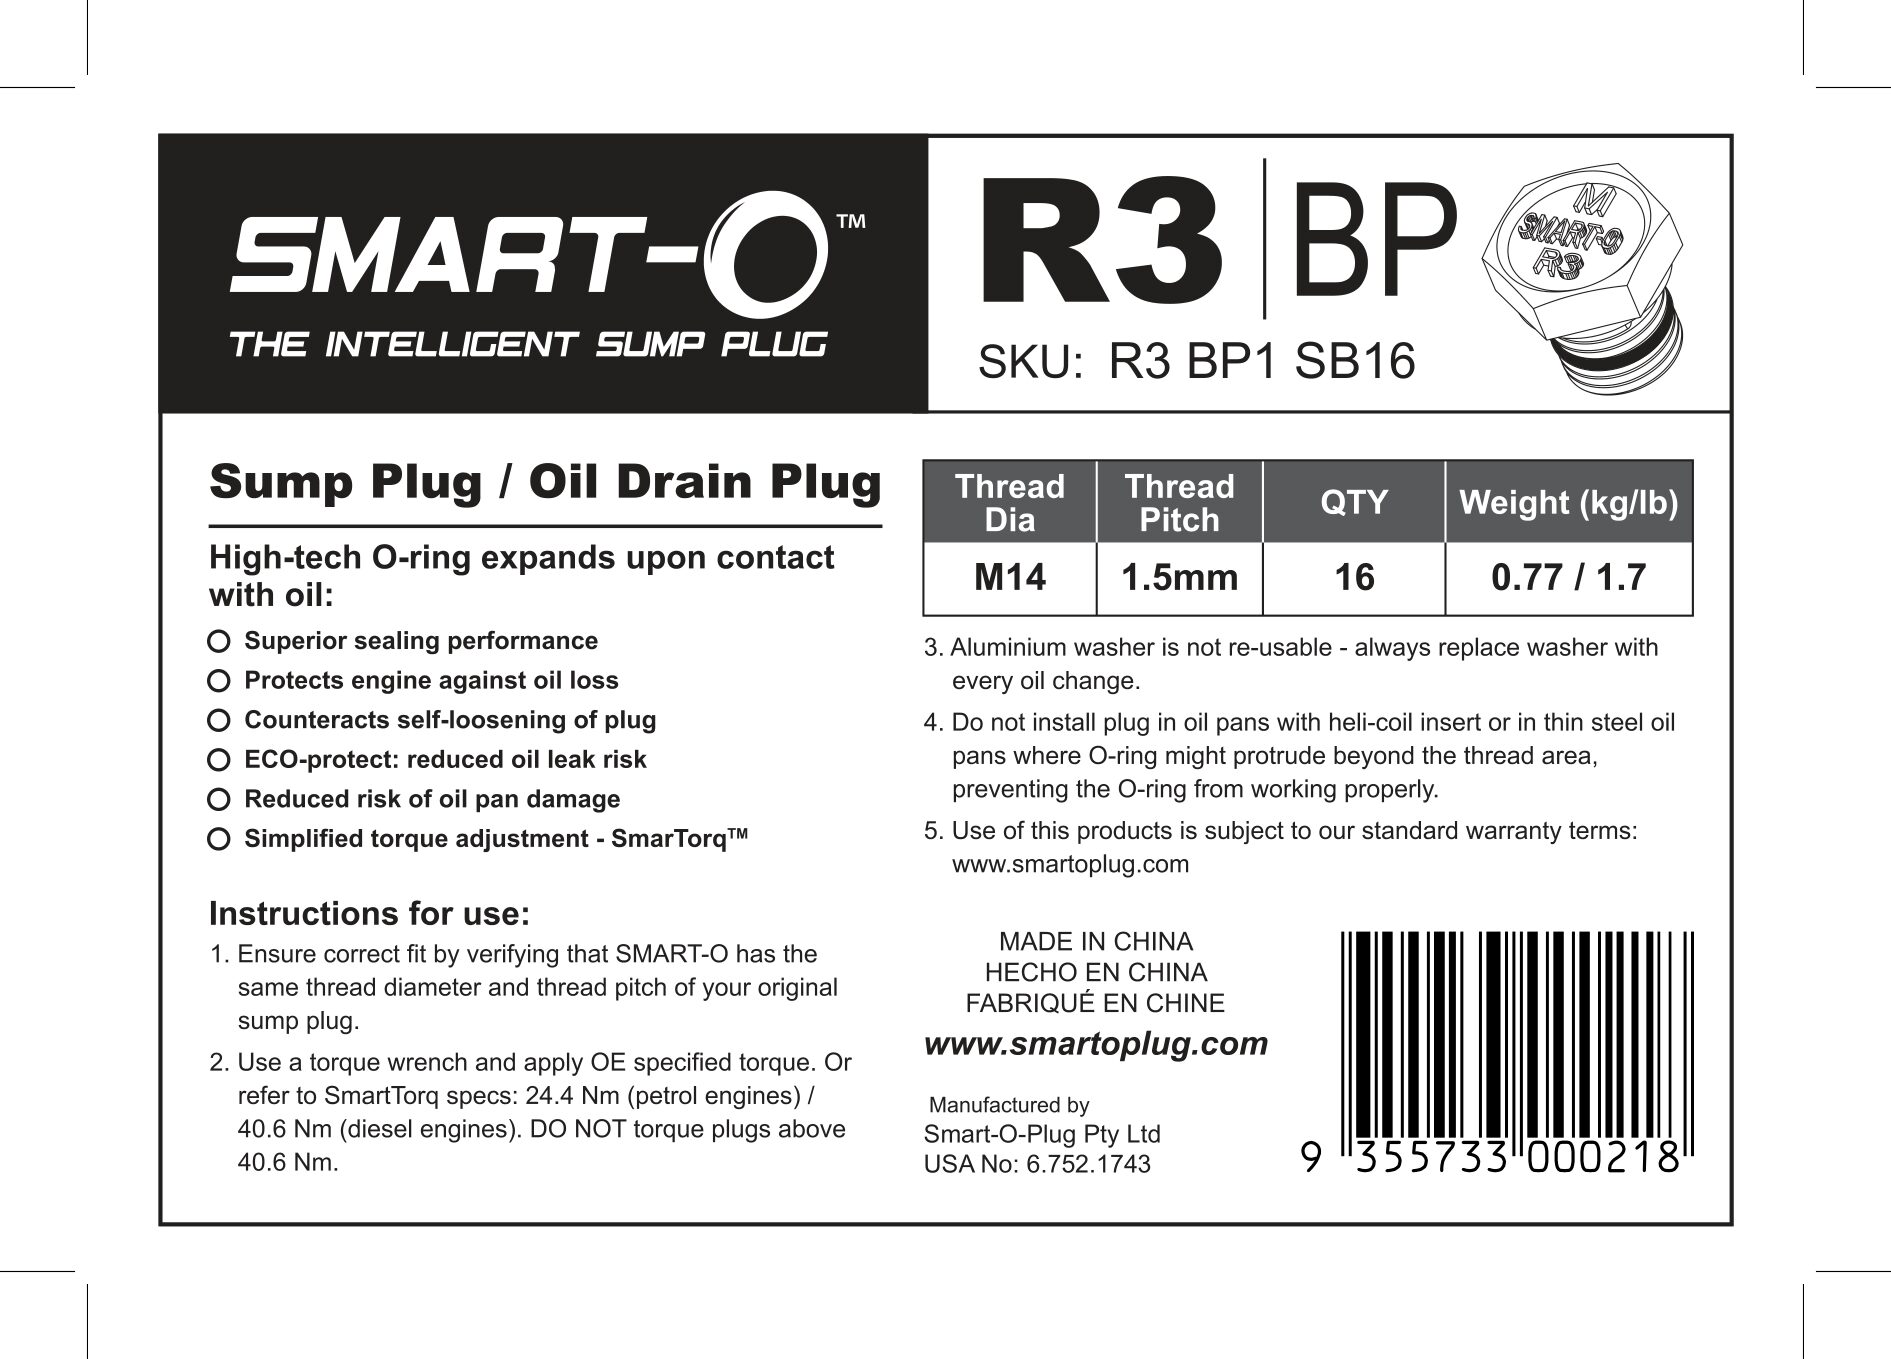 Install Faster SMART-O R3 Oil Drain Plug M14x1.5mm Engine oil Pan Protection Plug with Anti-leak & Anti-vibration function Re-usable and Eco-friendly by SMART-O 